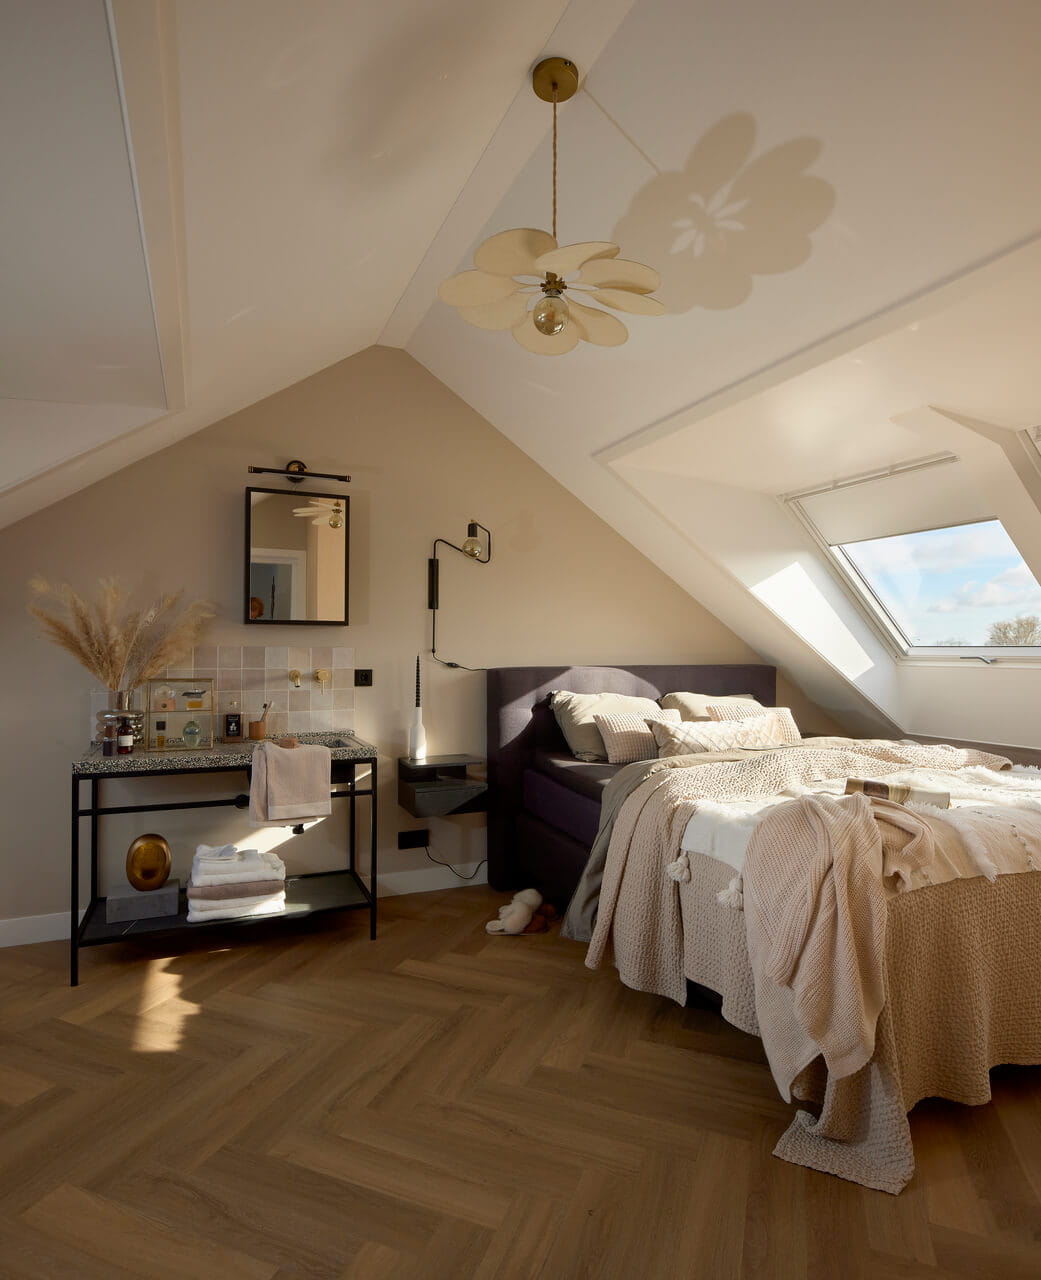 Bedroom in the attic with roof windows.